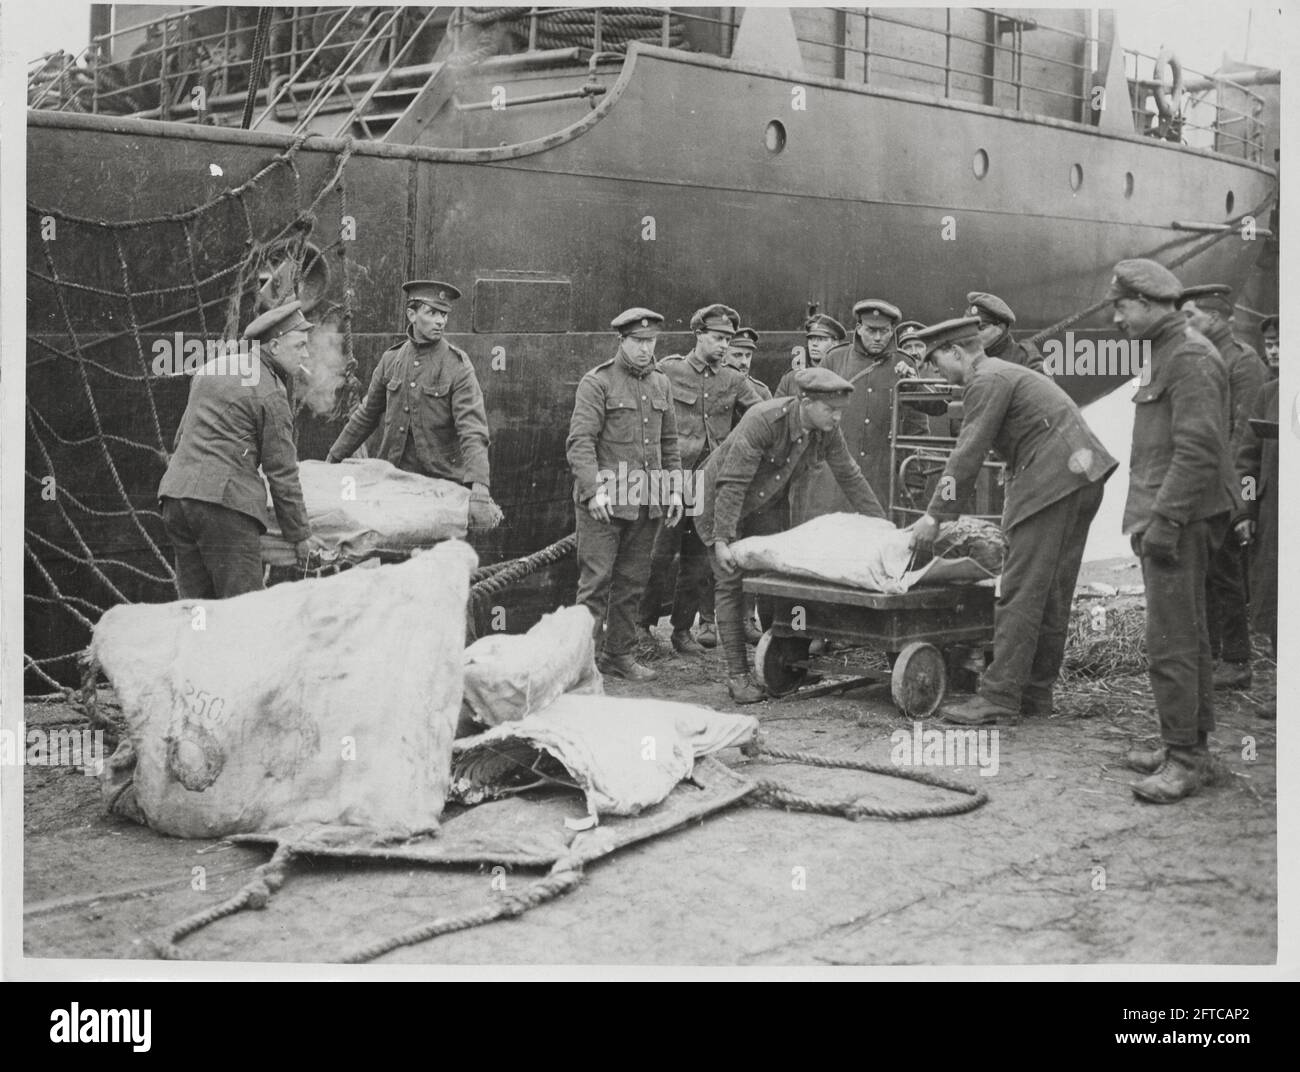 World War One, WWI, Western Front - Unloading meat from a food supply ...